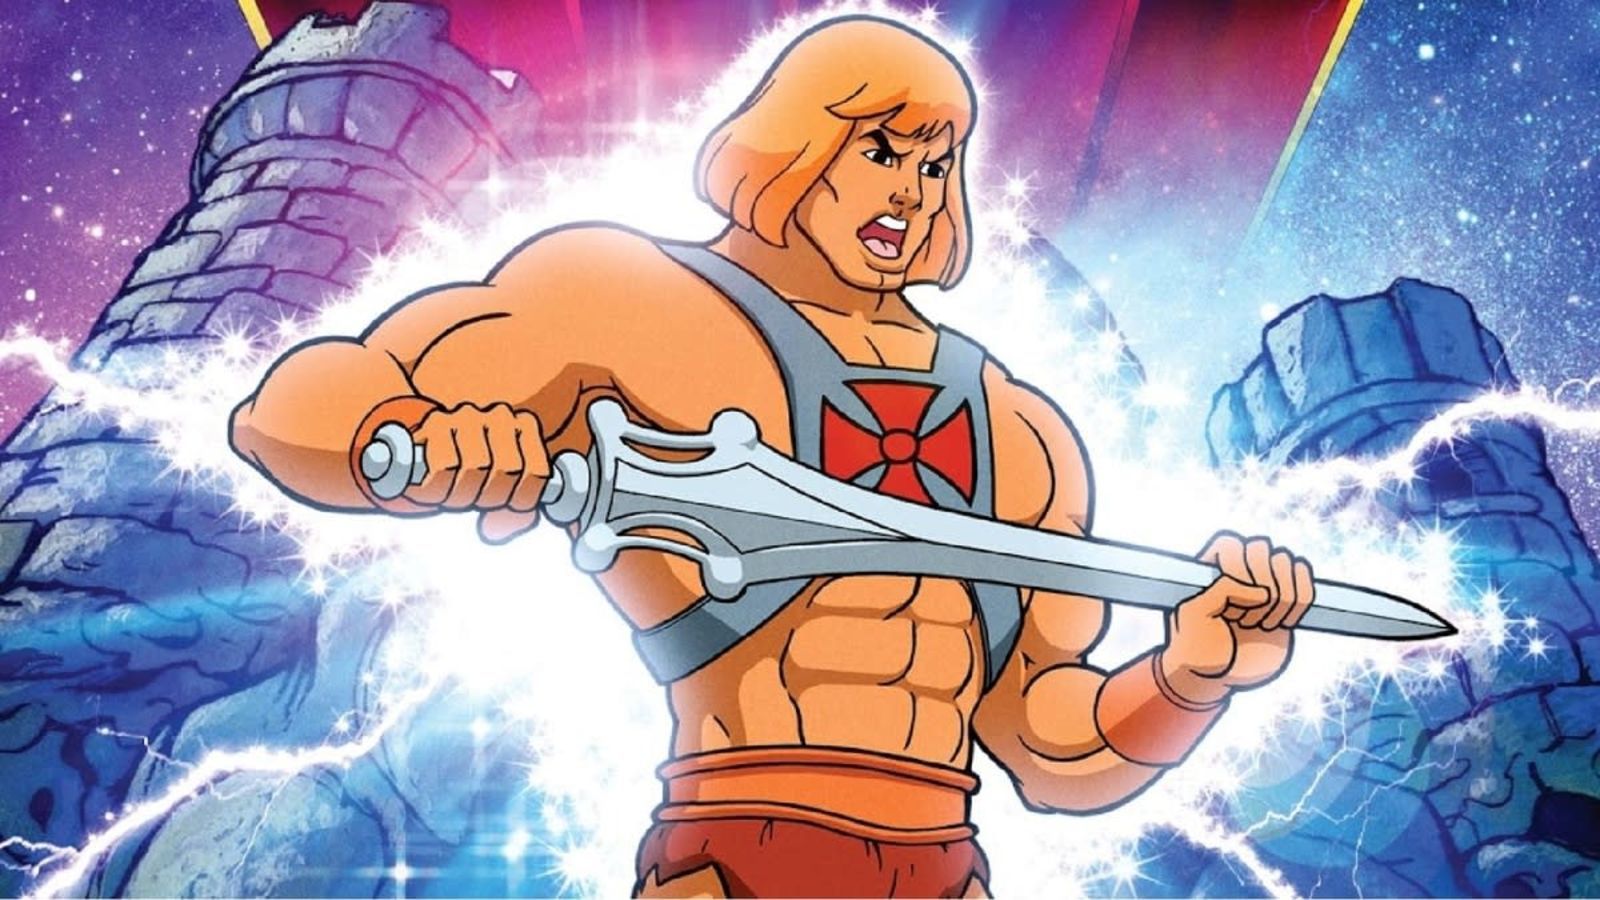 Dream Casting: He-Man and the Masters of the Universe.